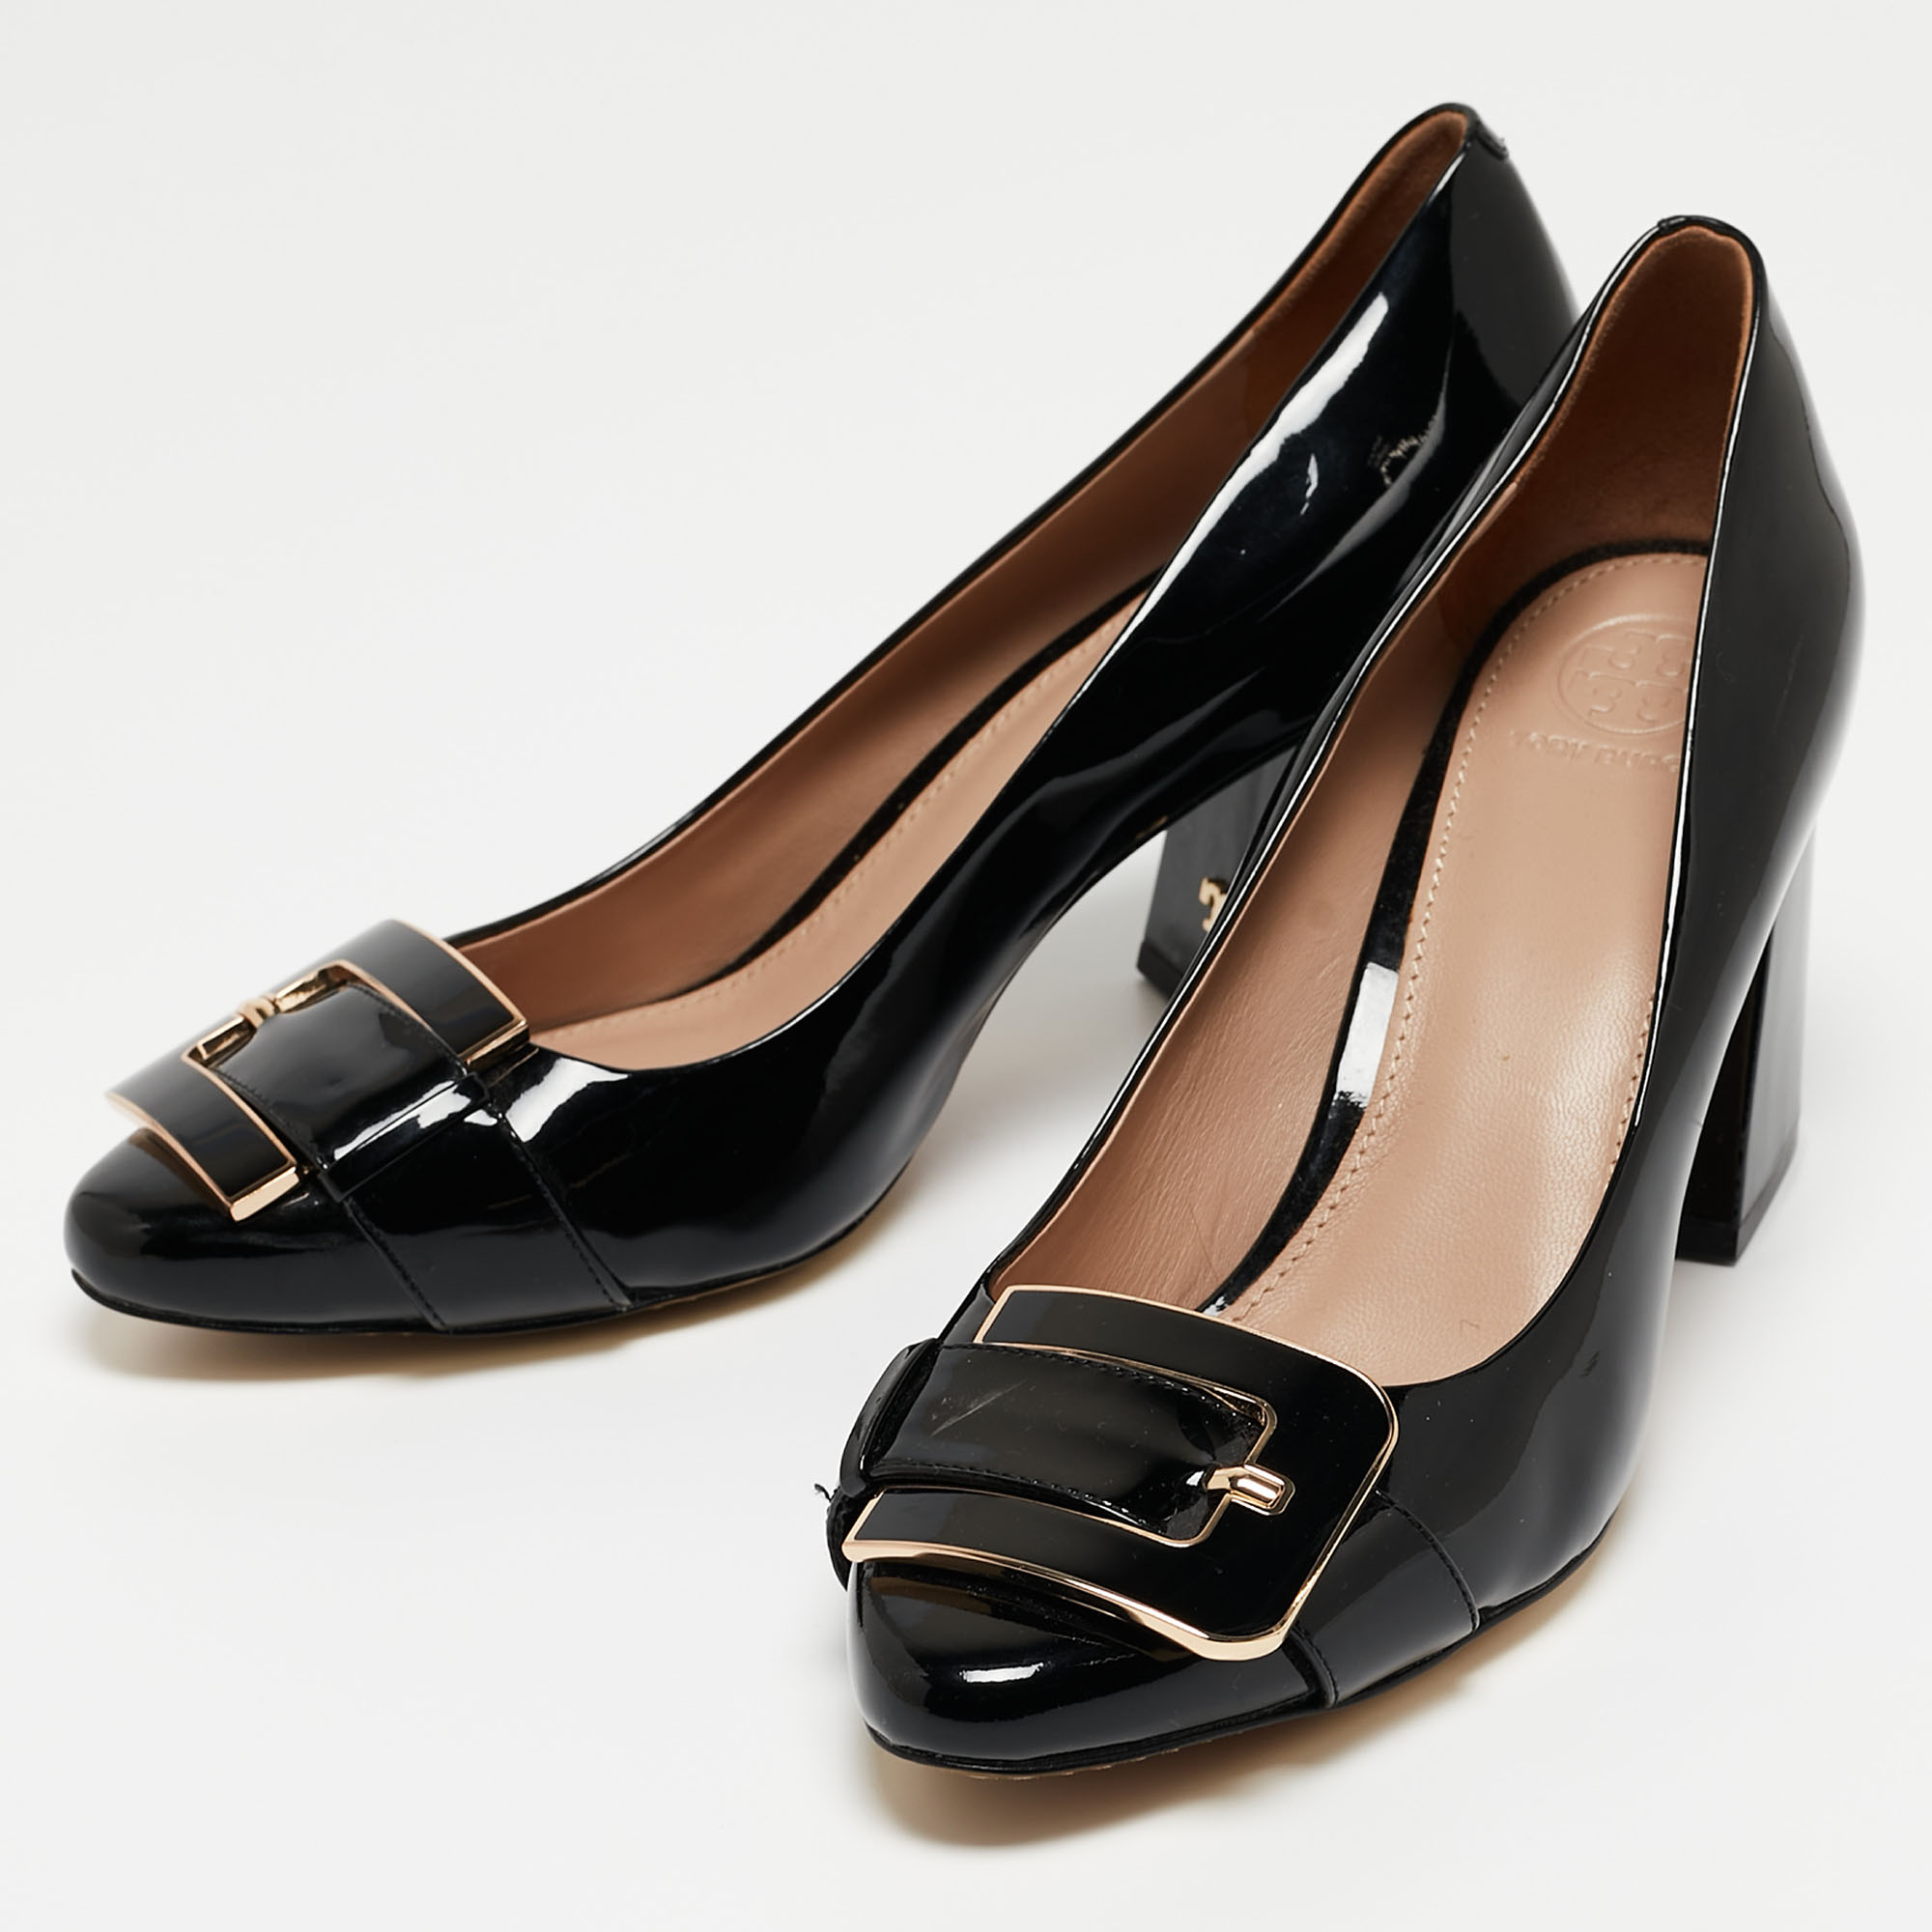 

Tory Burch Black Patent Leather Maria Pumps Size